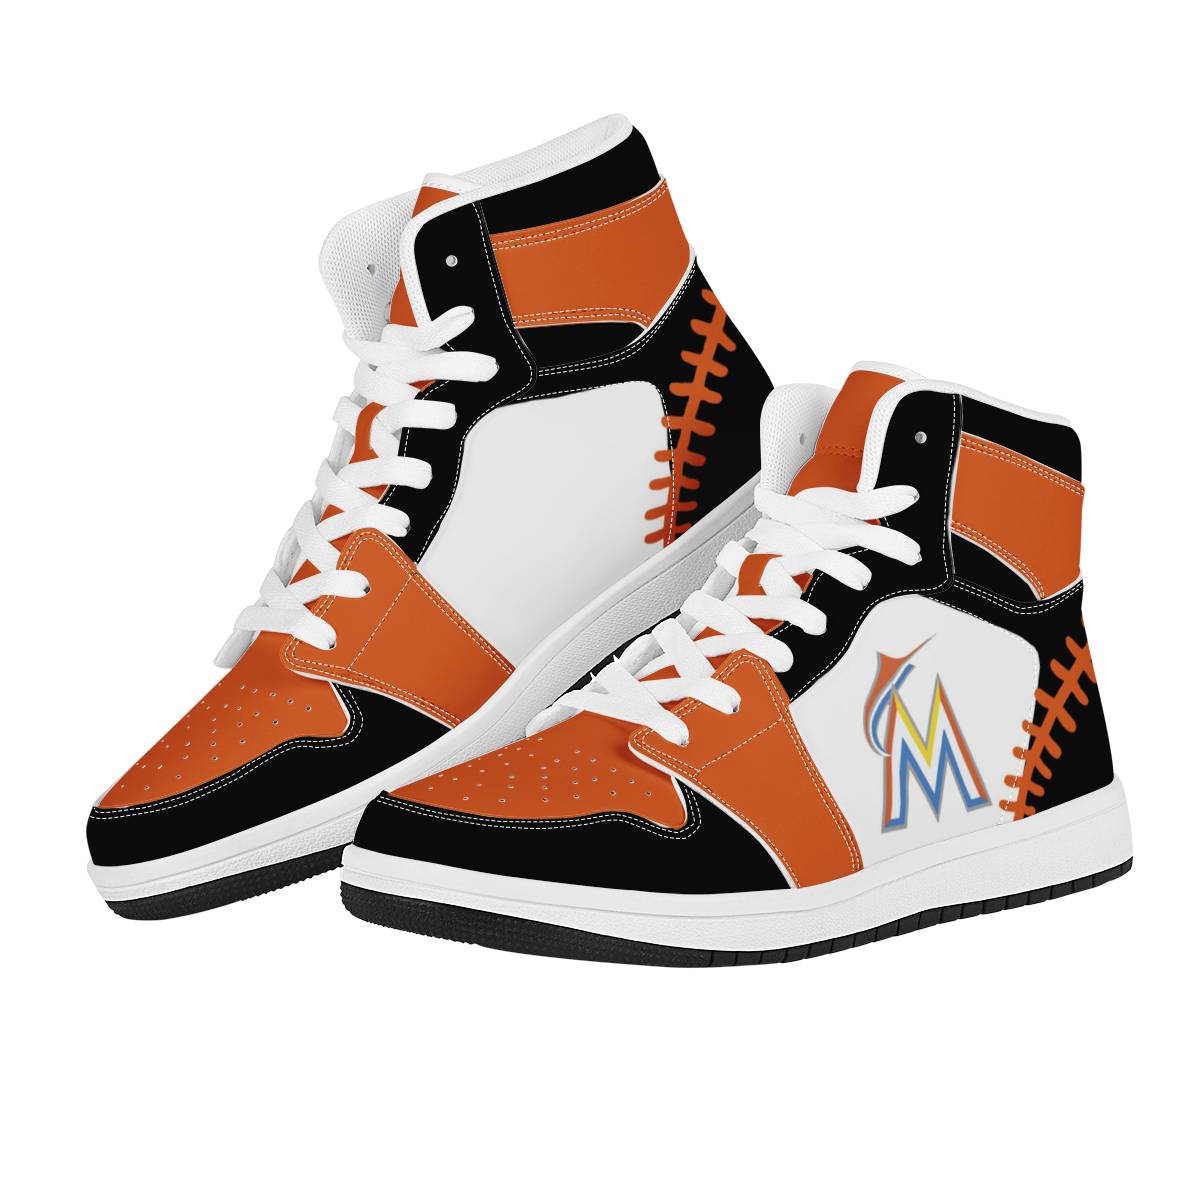 Women's Miami Marlins High Top Leather AJ1 Sneakers 003